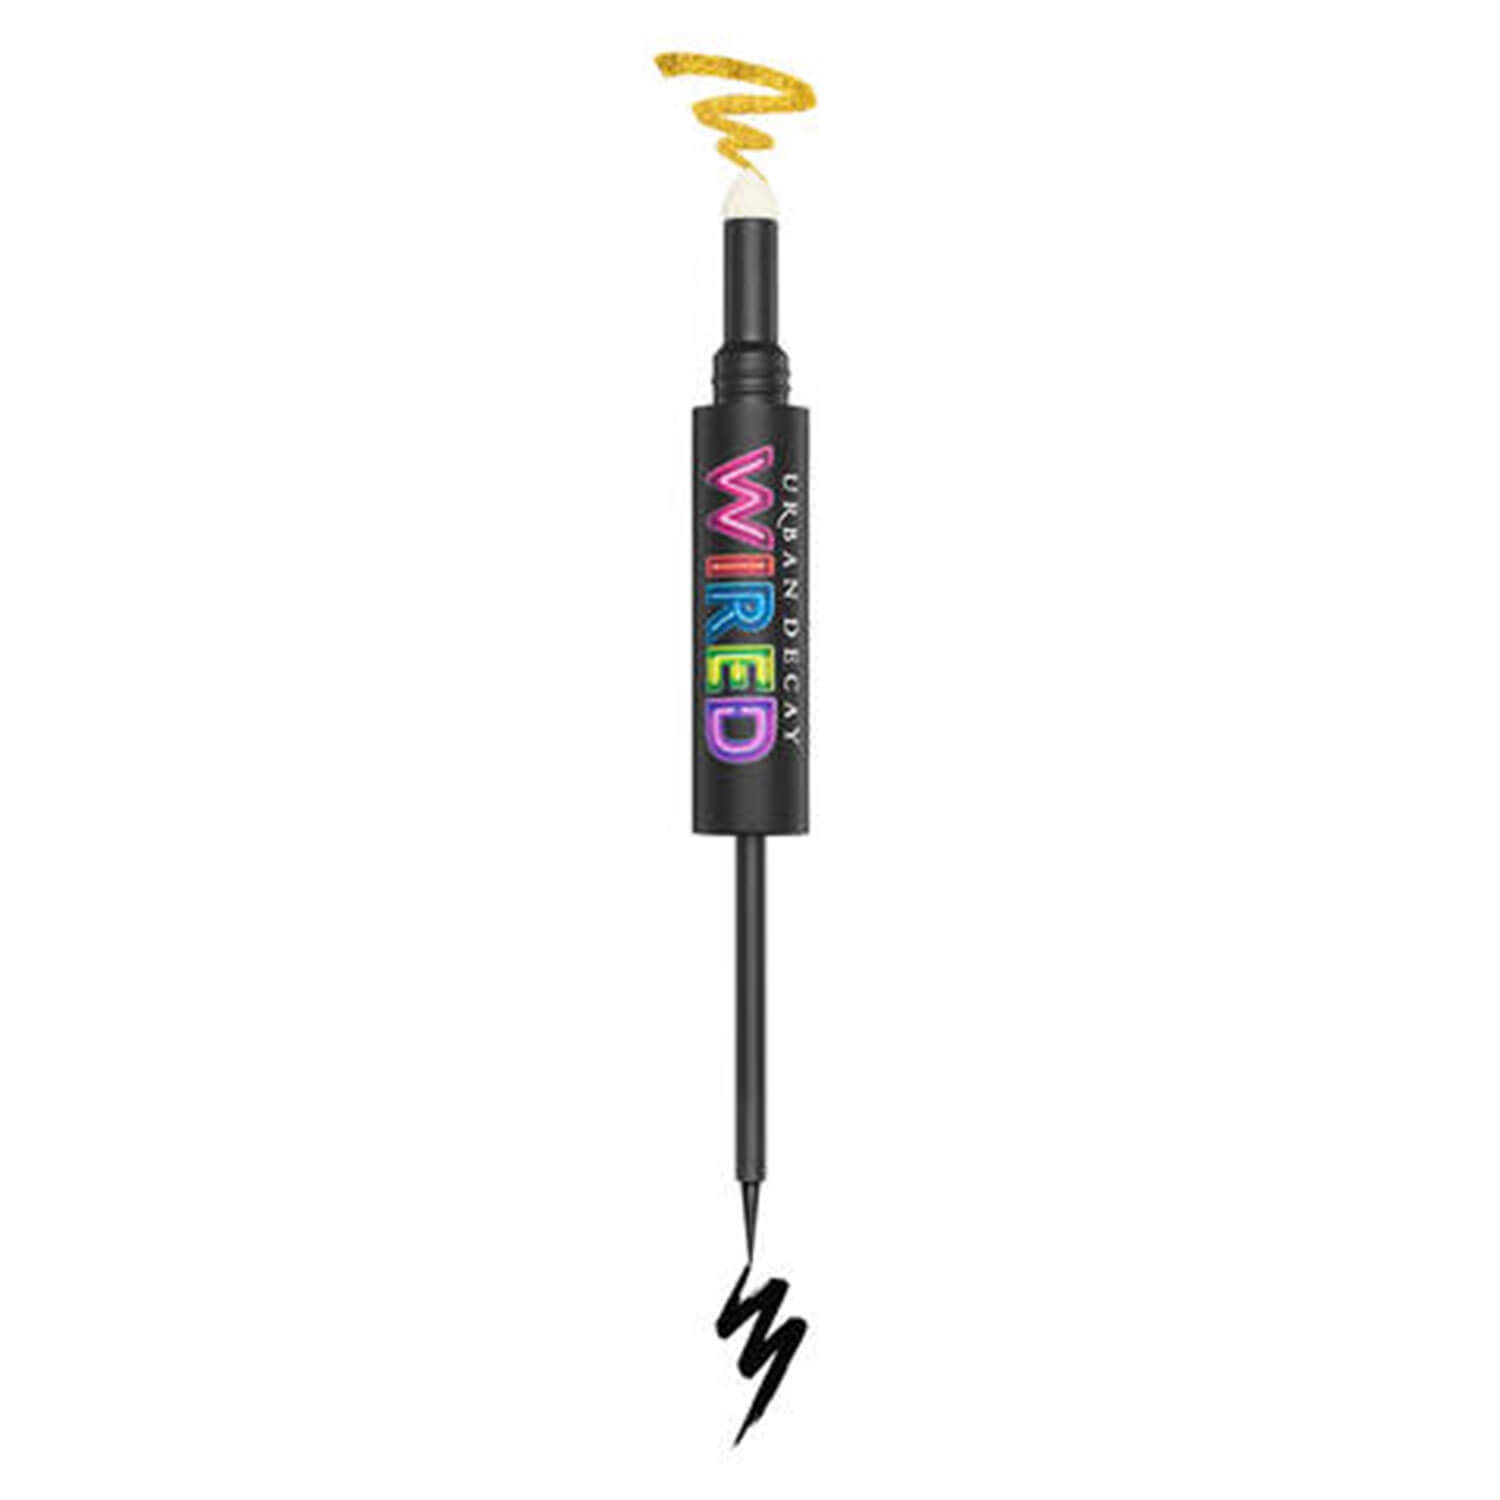 Produktbild von Wired - Double-Ended Eyeliner & Top Coat Circuit